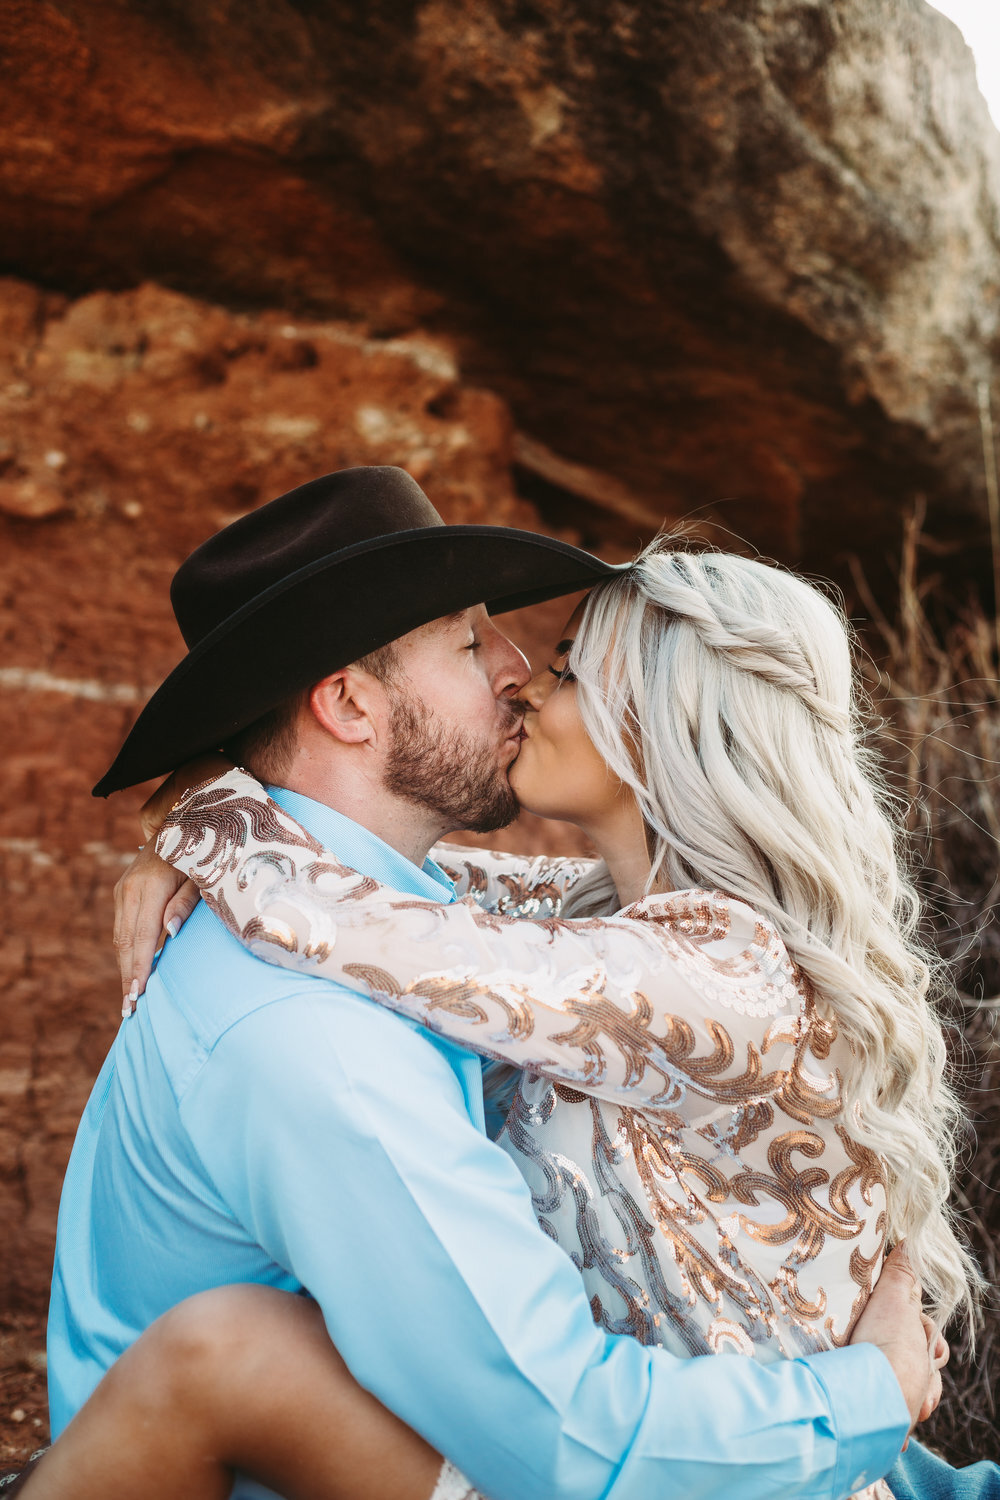  Groom to be carrying his future bride with accents on her sequin dress and black cowboy hat with red rock in the background #engagementphotos #engaged #personality #amarillotexas #engagementphotographer #lifestylephotos #amarillophotographer #locationchoice #texasengagementphotos #engagment #tealawardphotography #westernstyle 